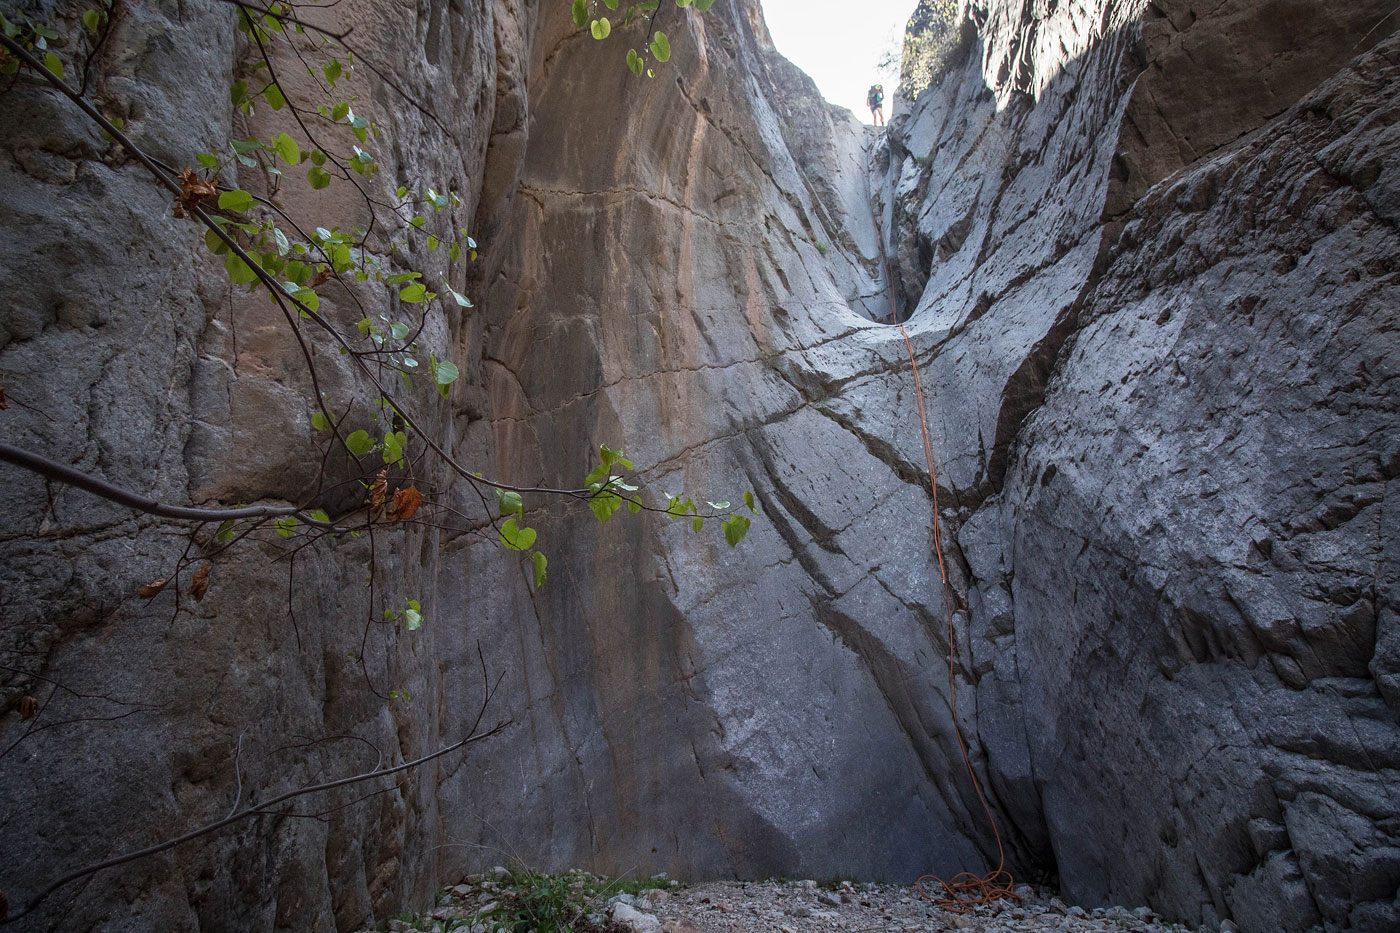 Canyoneer Cherry Canyon in Virgin River Gorge BLM, Arizona - Stav is Lost